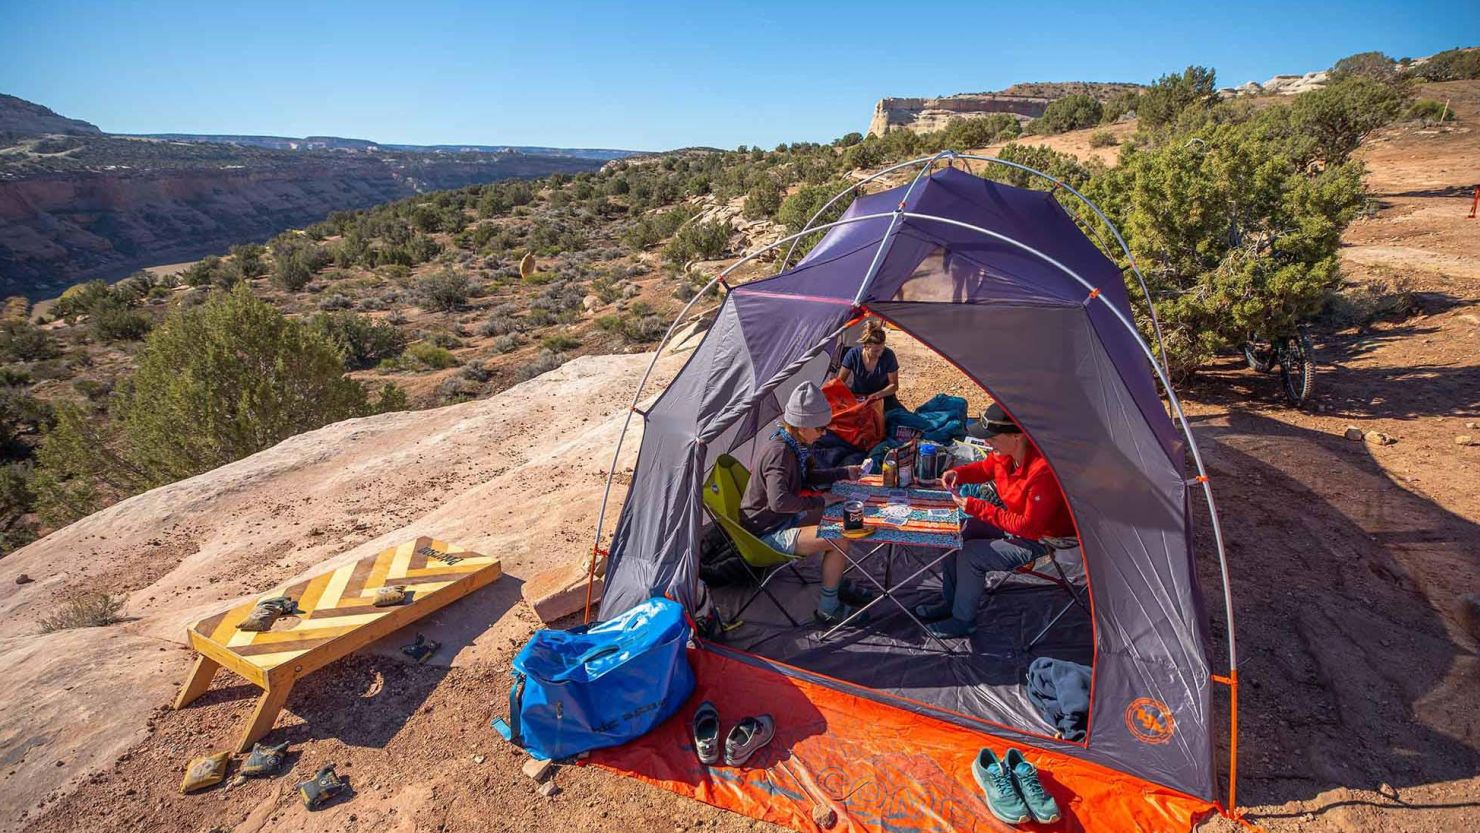 Top 5 Best Camping Gadgets - Expert reviews & guides